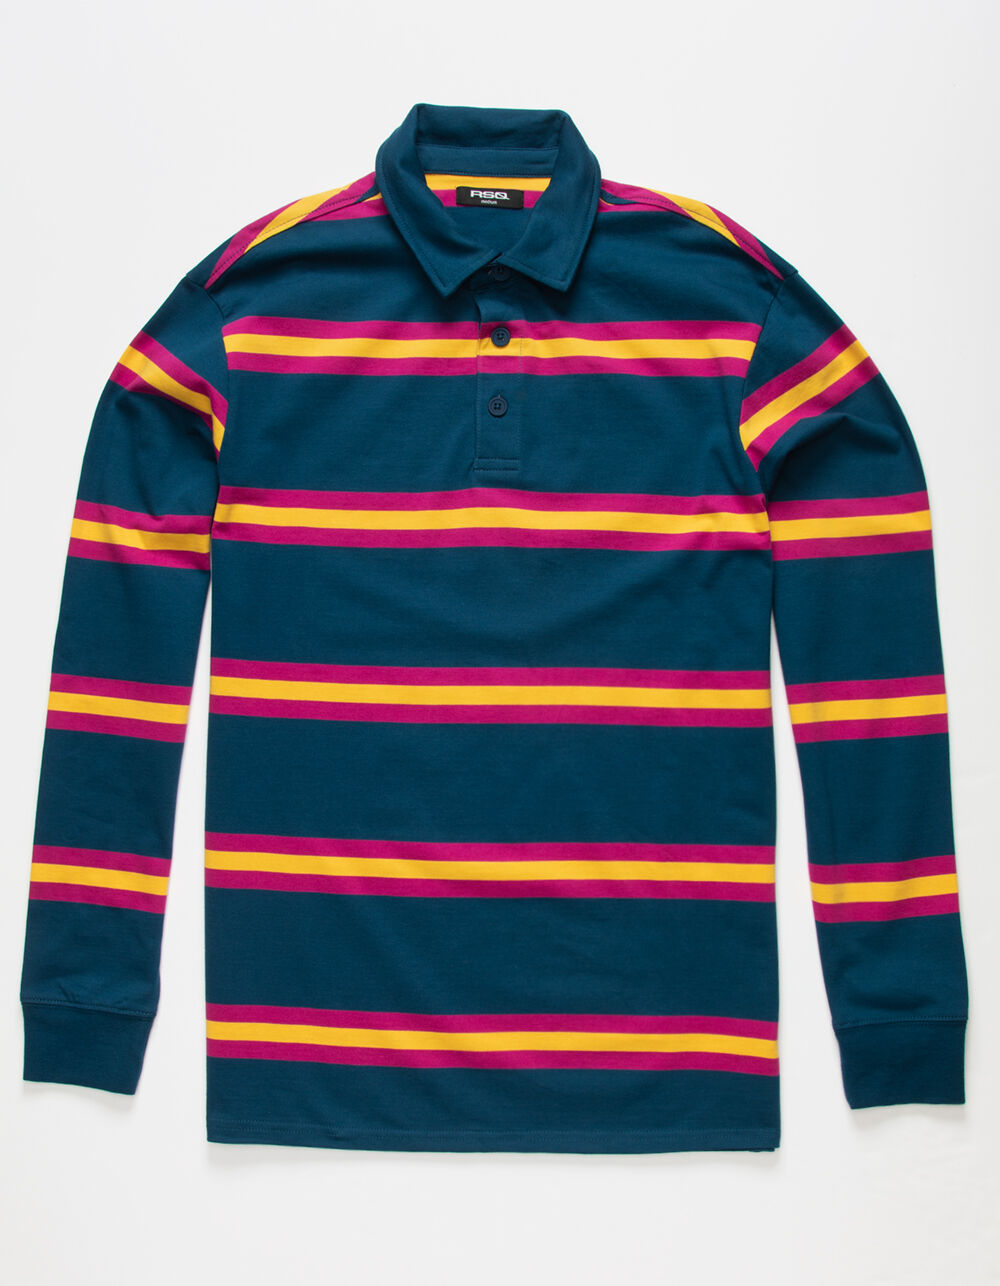 RSQ Navy Striped Mens Rugby Shirt - NAVY | Tillys